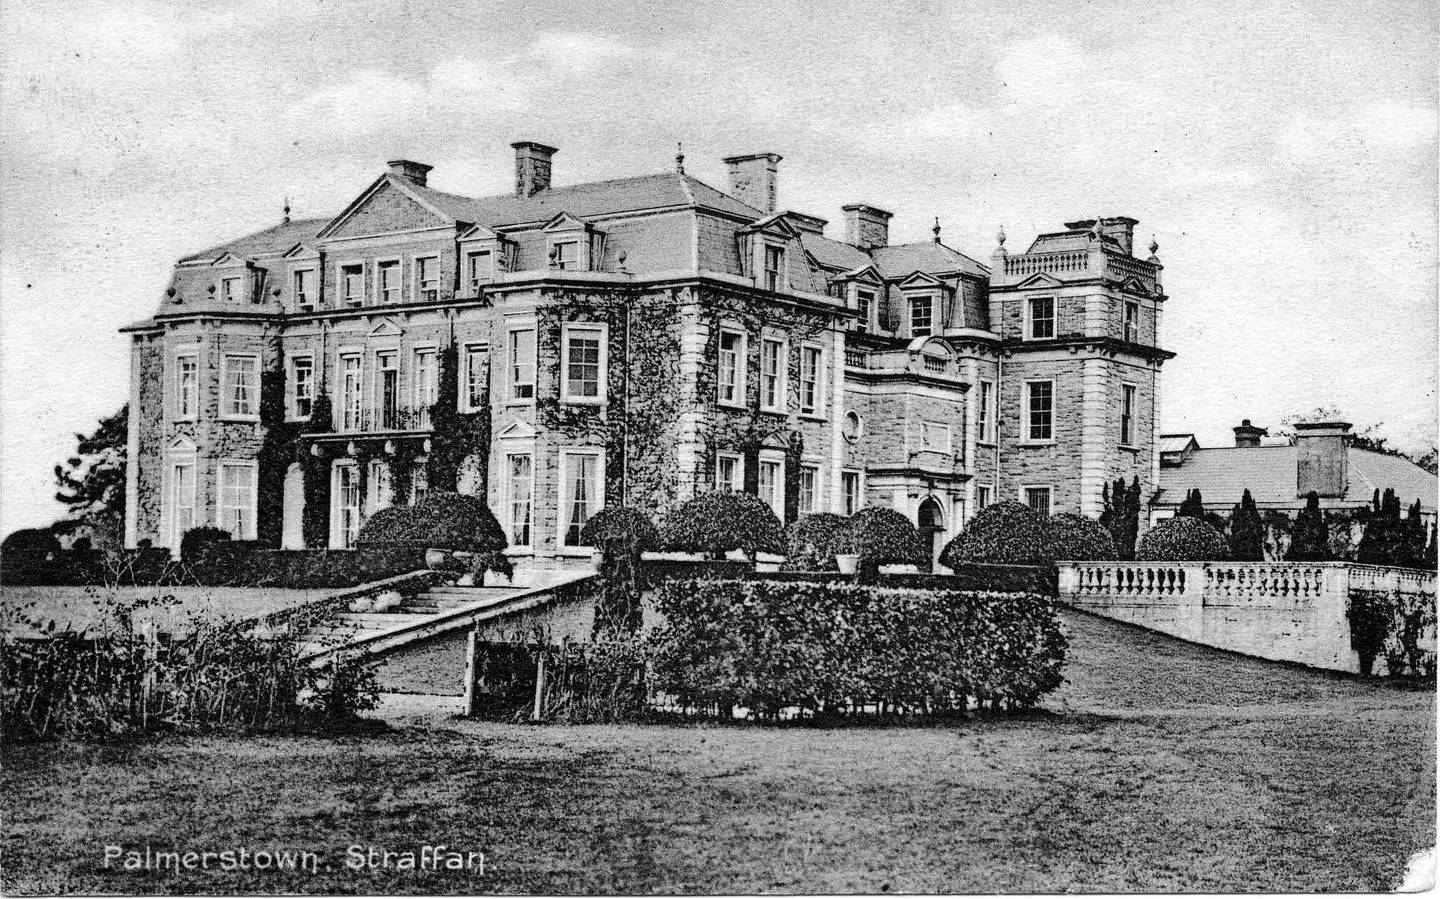 Palmerstown House in Johnstown, County Kildare, the home of Dermot Bourke, 7th Earl of Mayo, was burned and destroyed by the Irish Republican Army (IRA) on January 29, 1923.